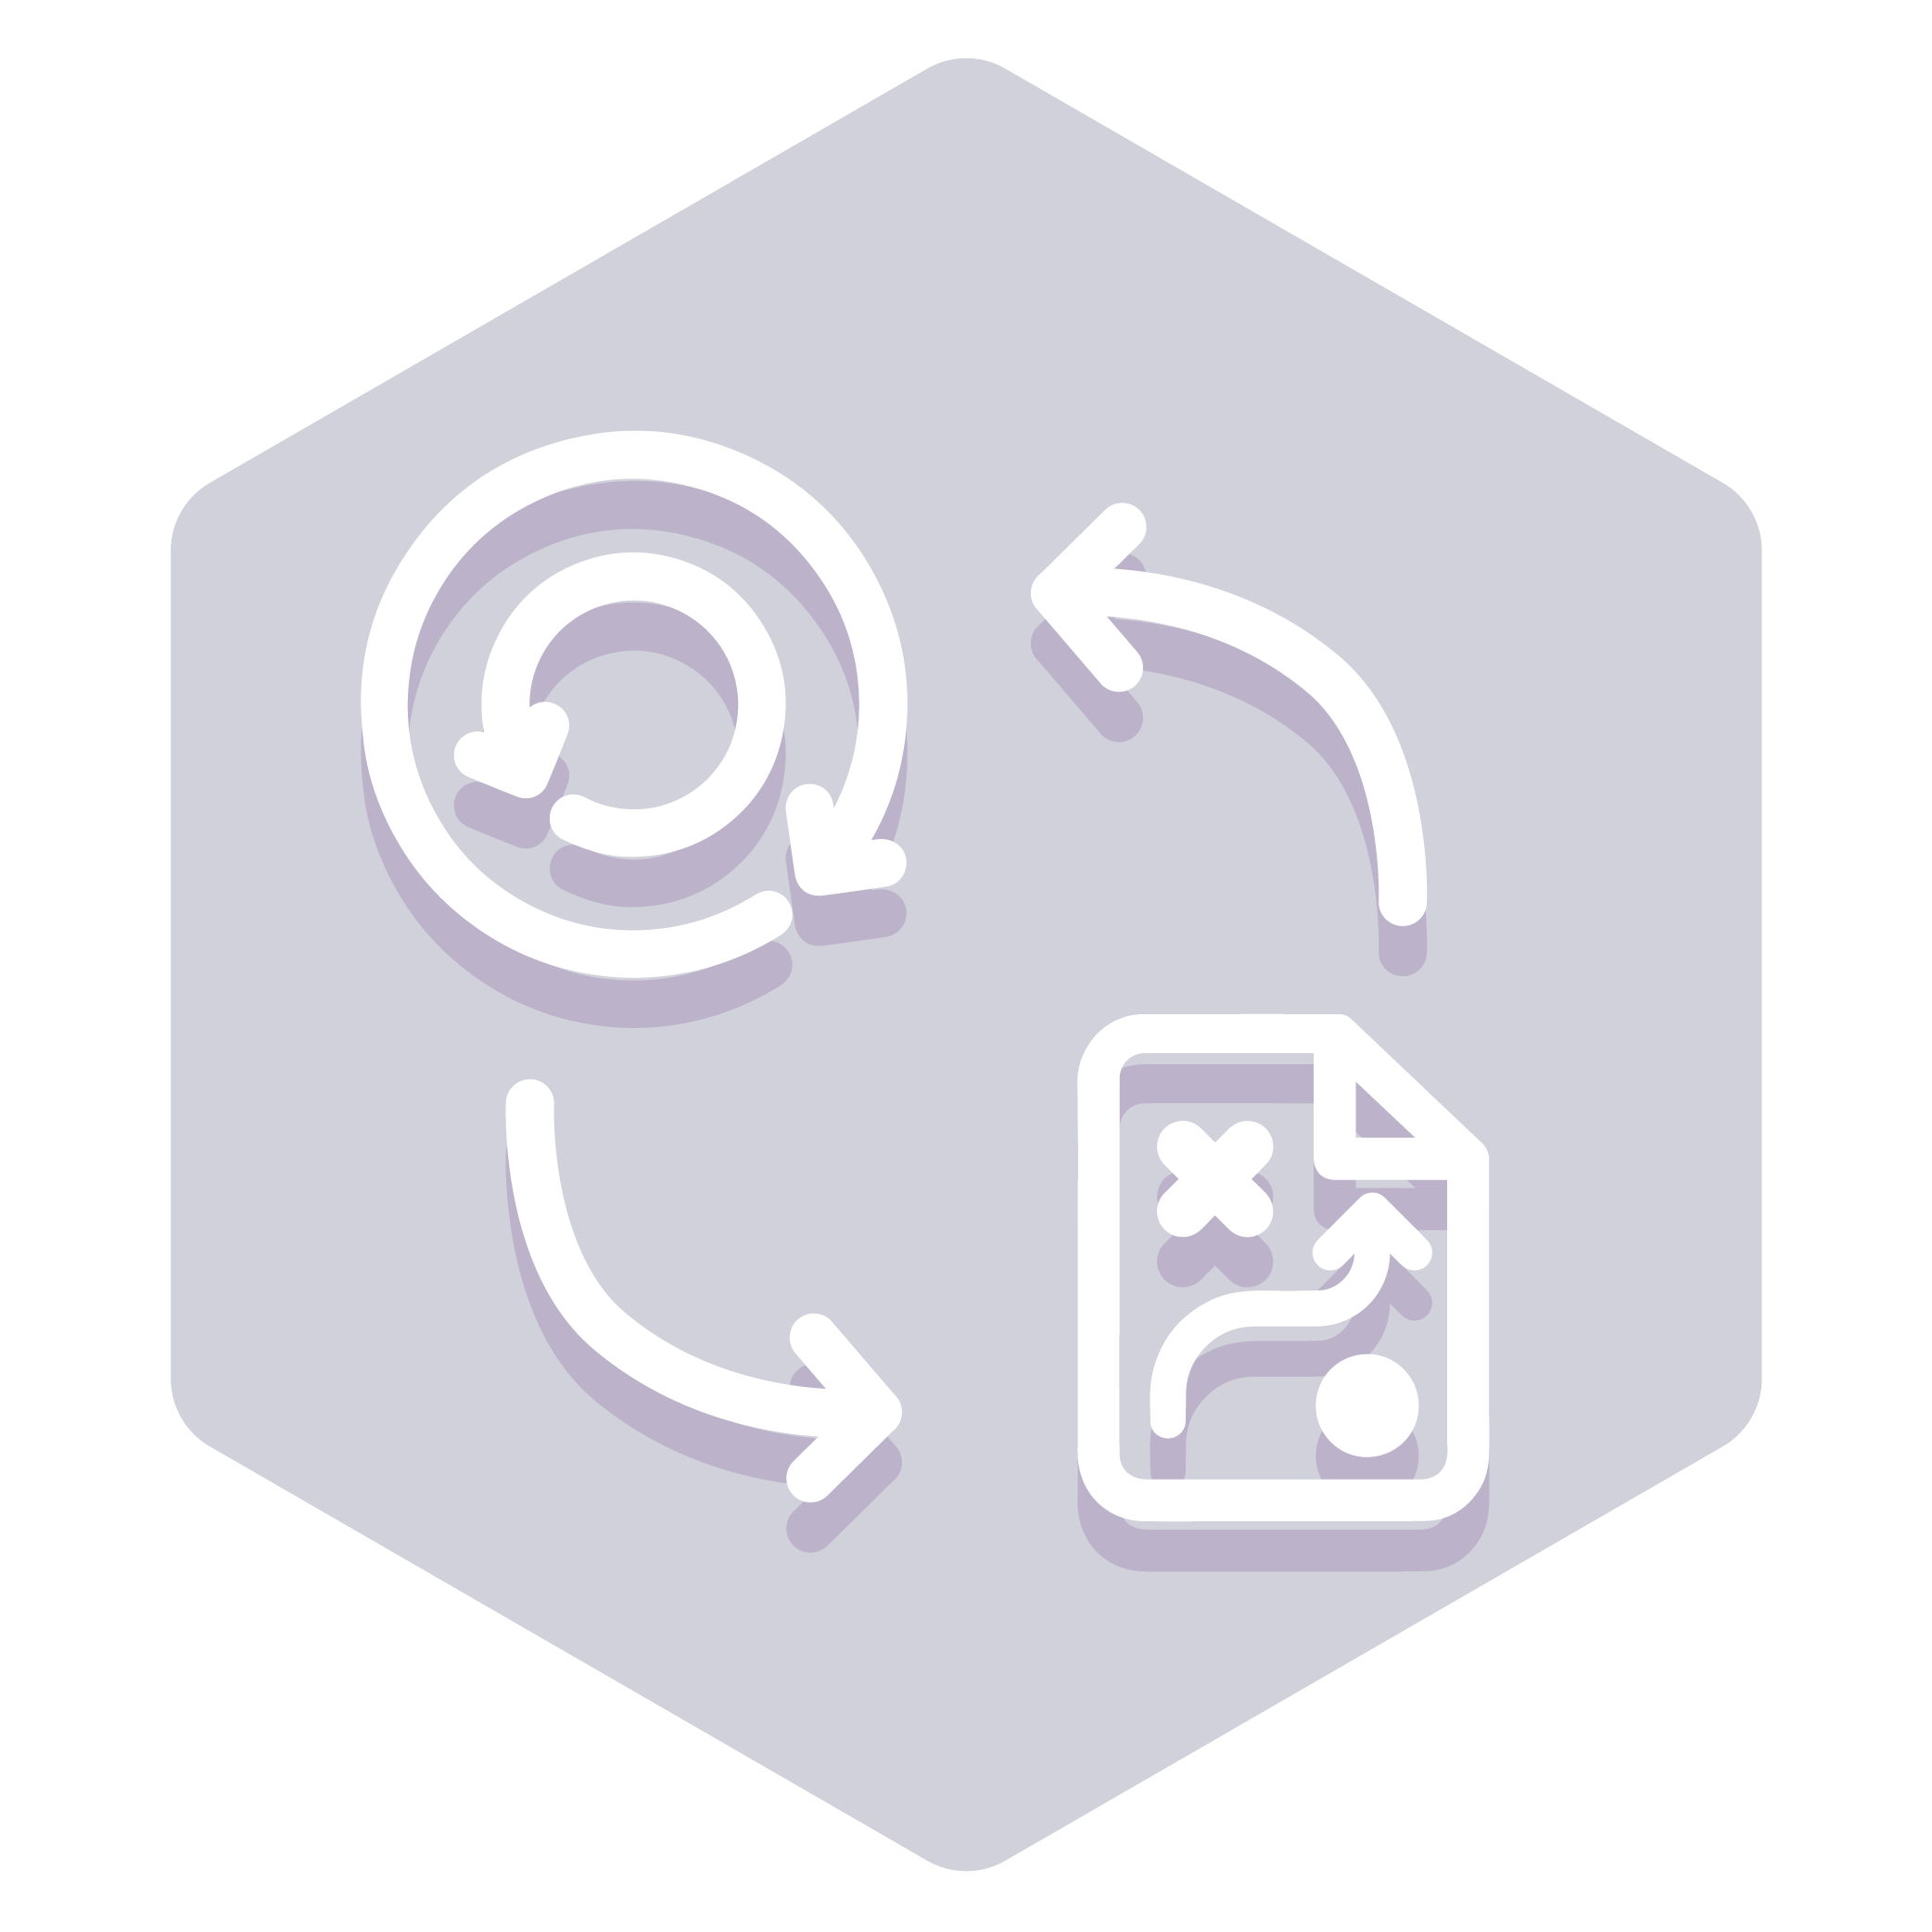 mission badge: Asynchronous Processing Design